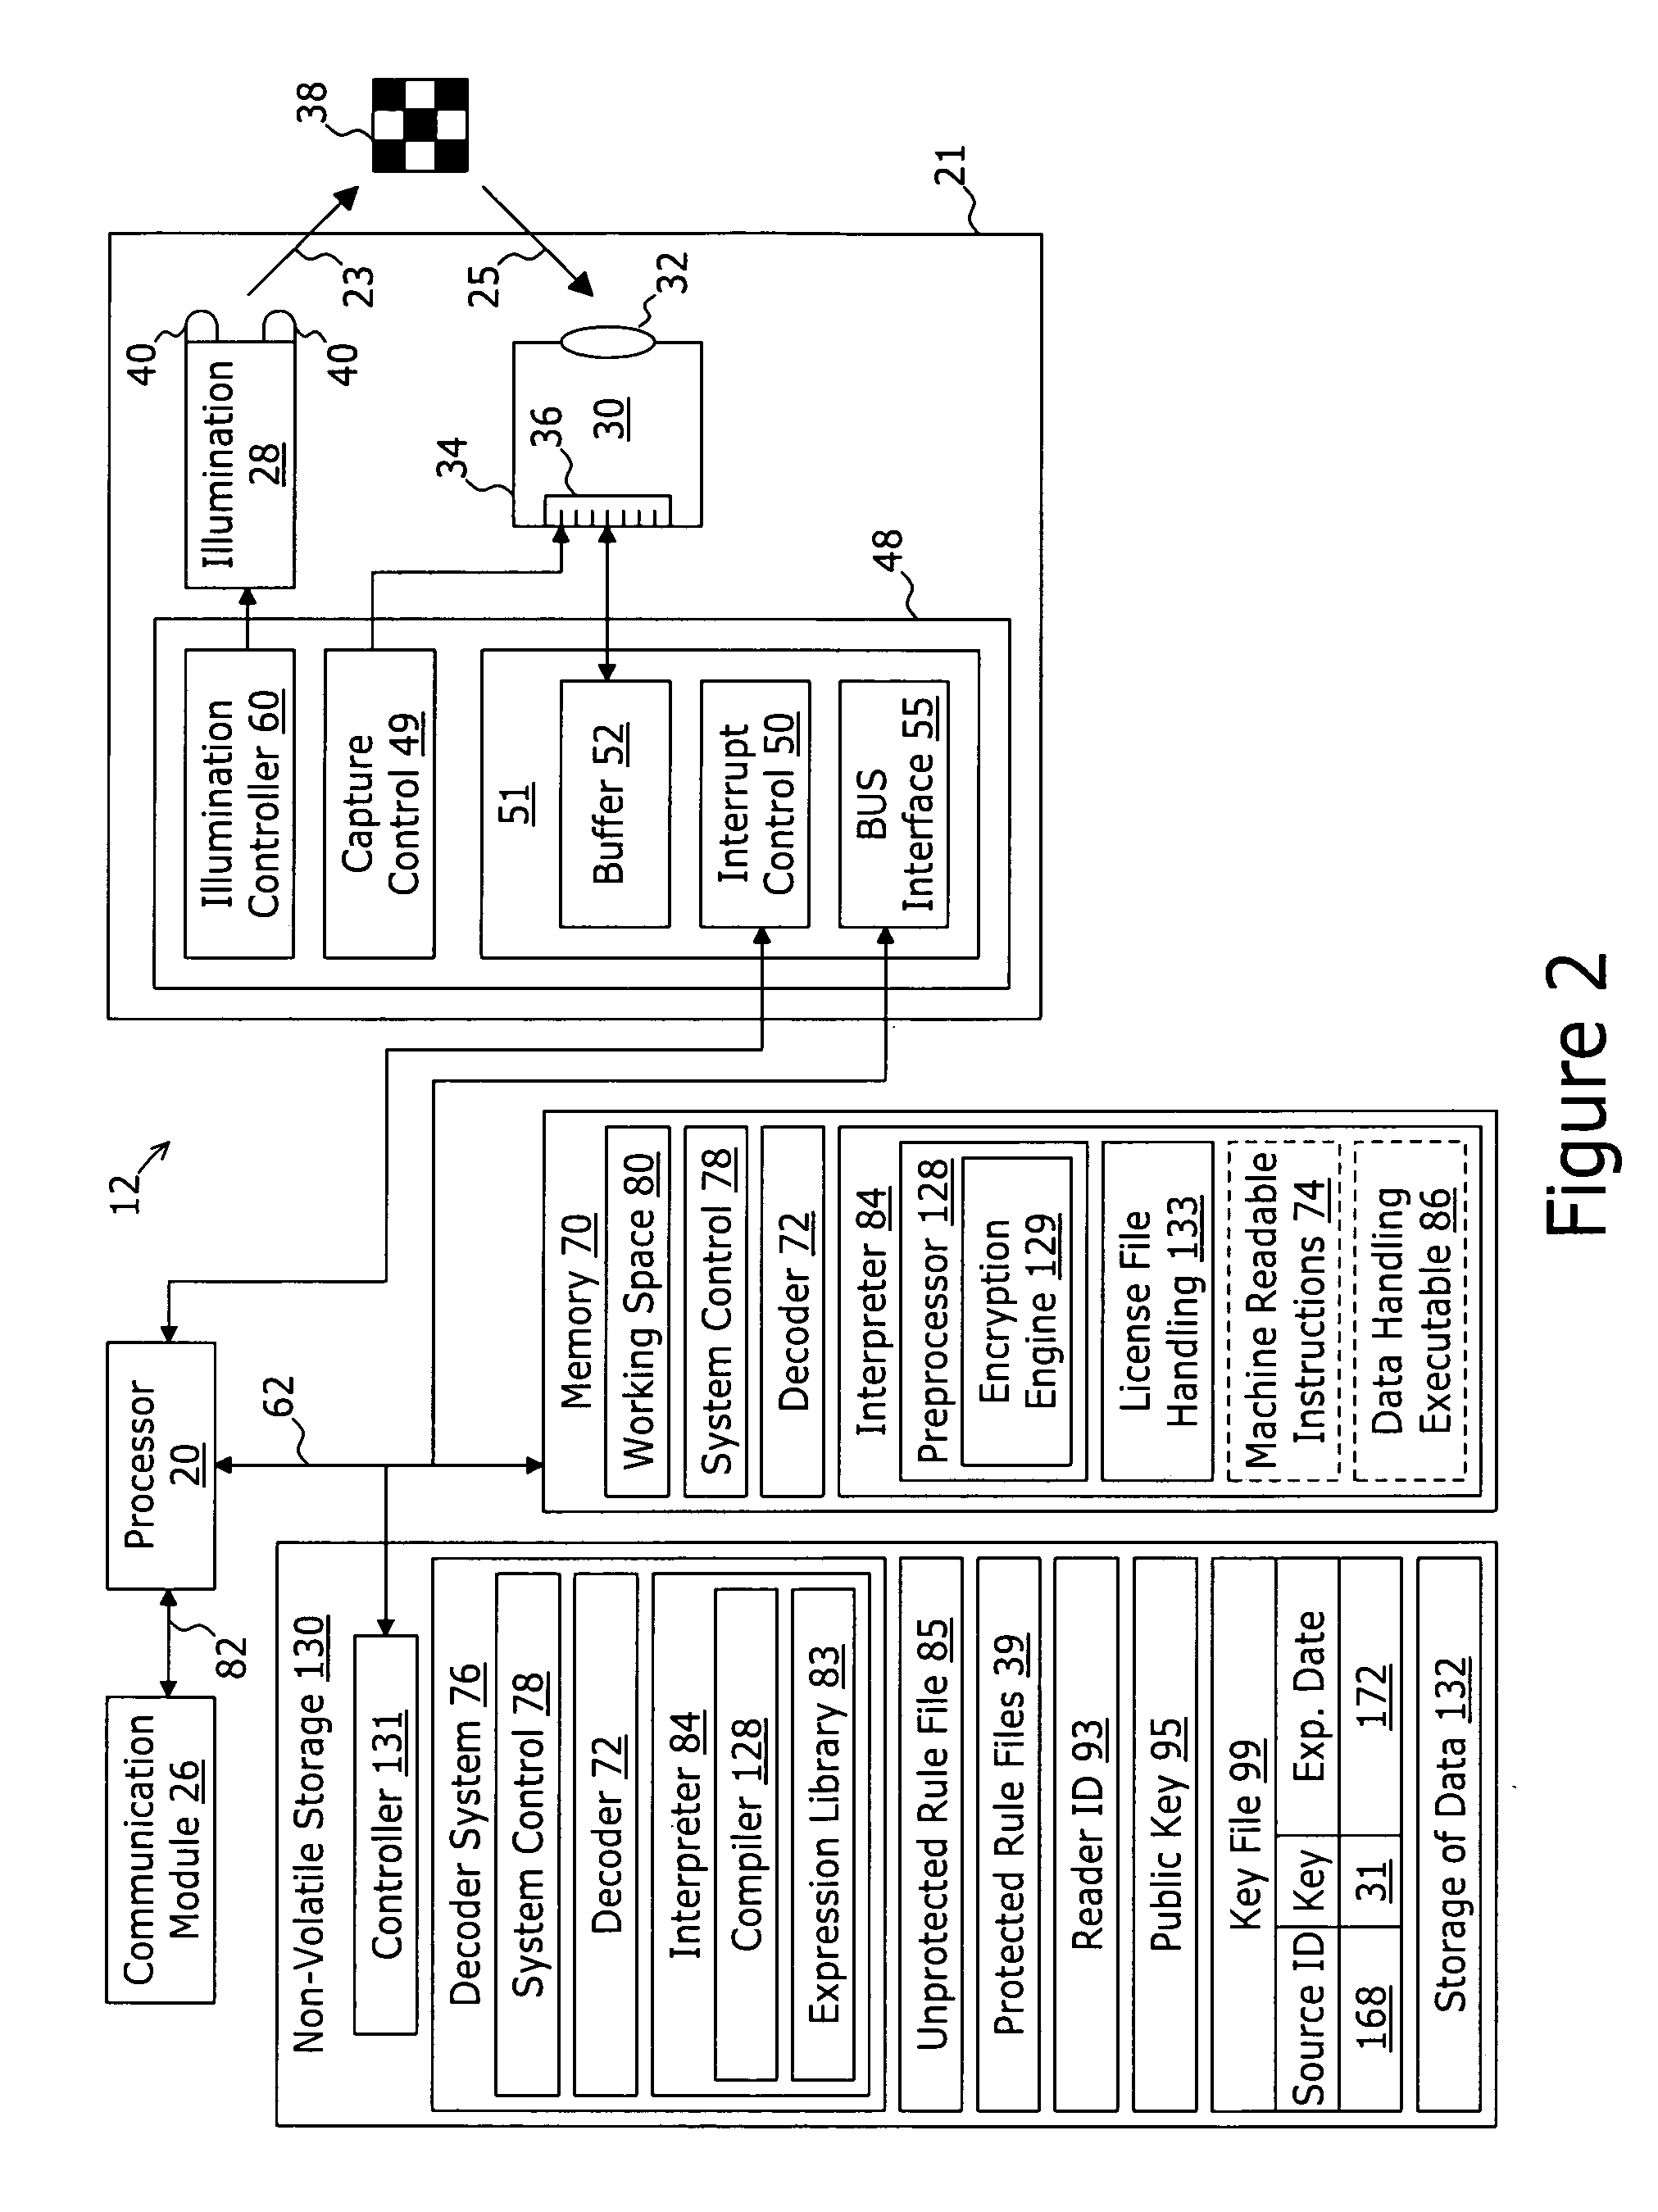 System and method for controlling the distribution of data translation components to portable data collection devices